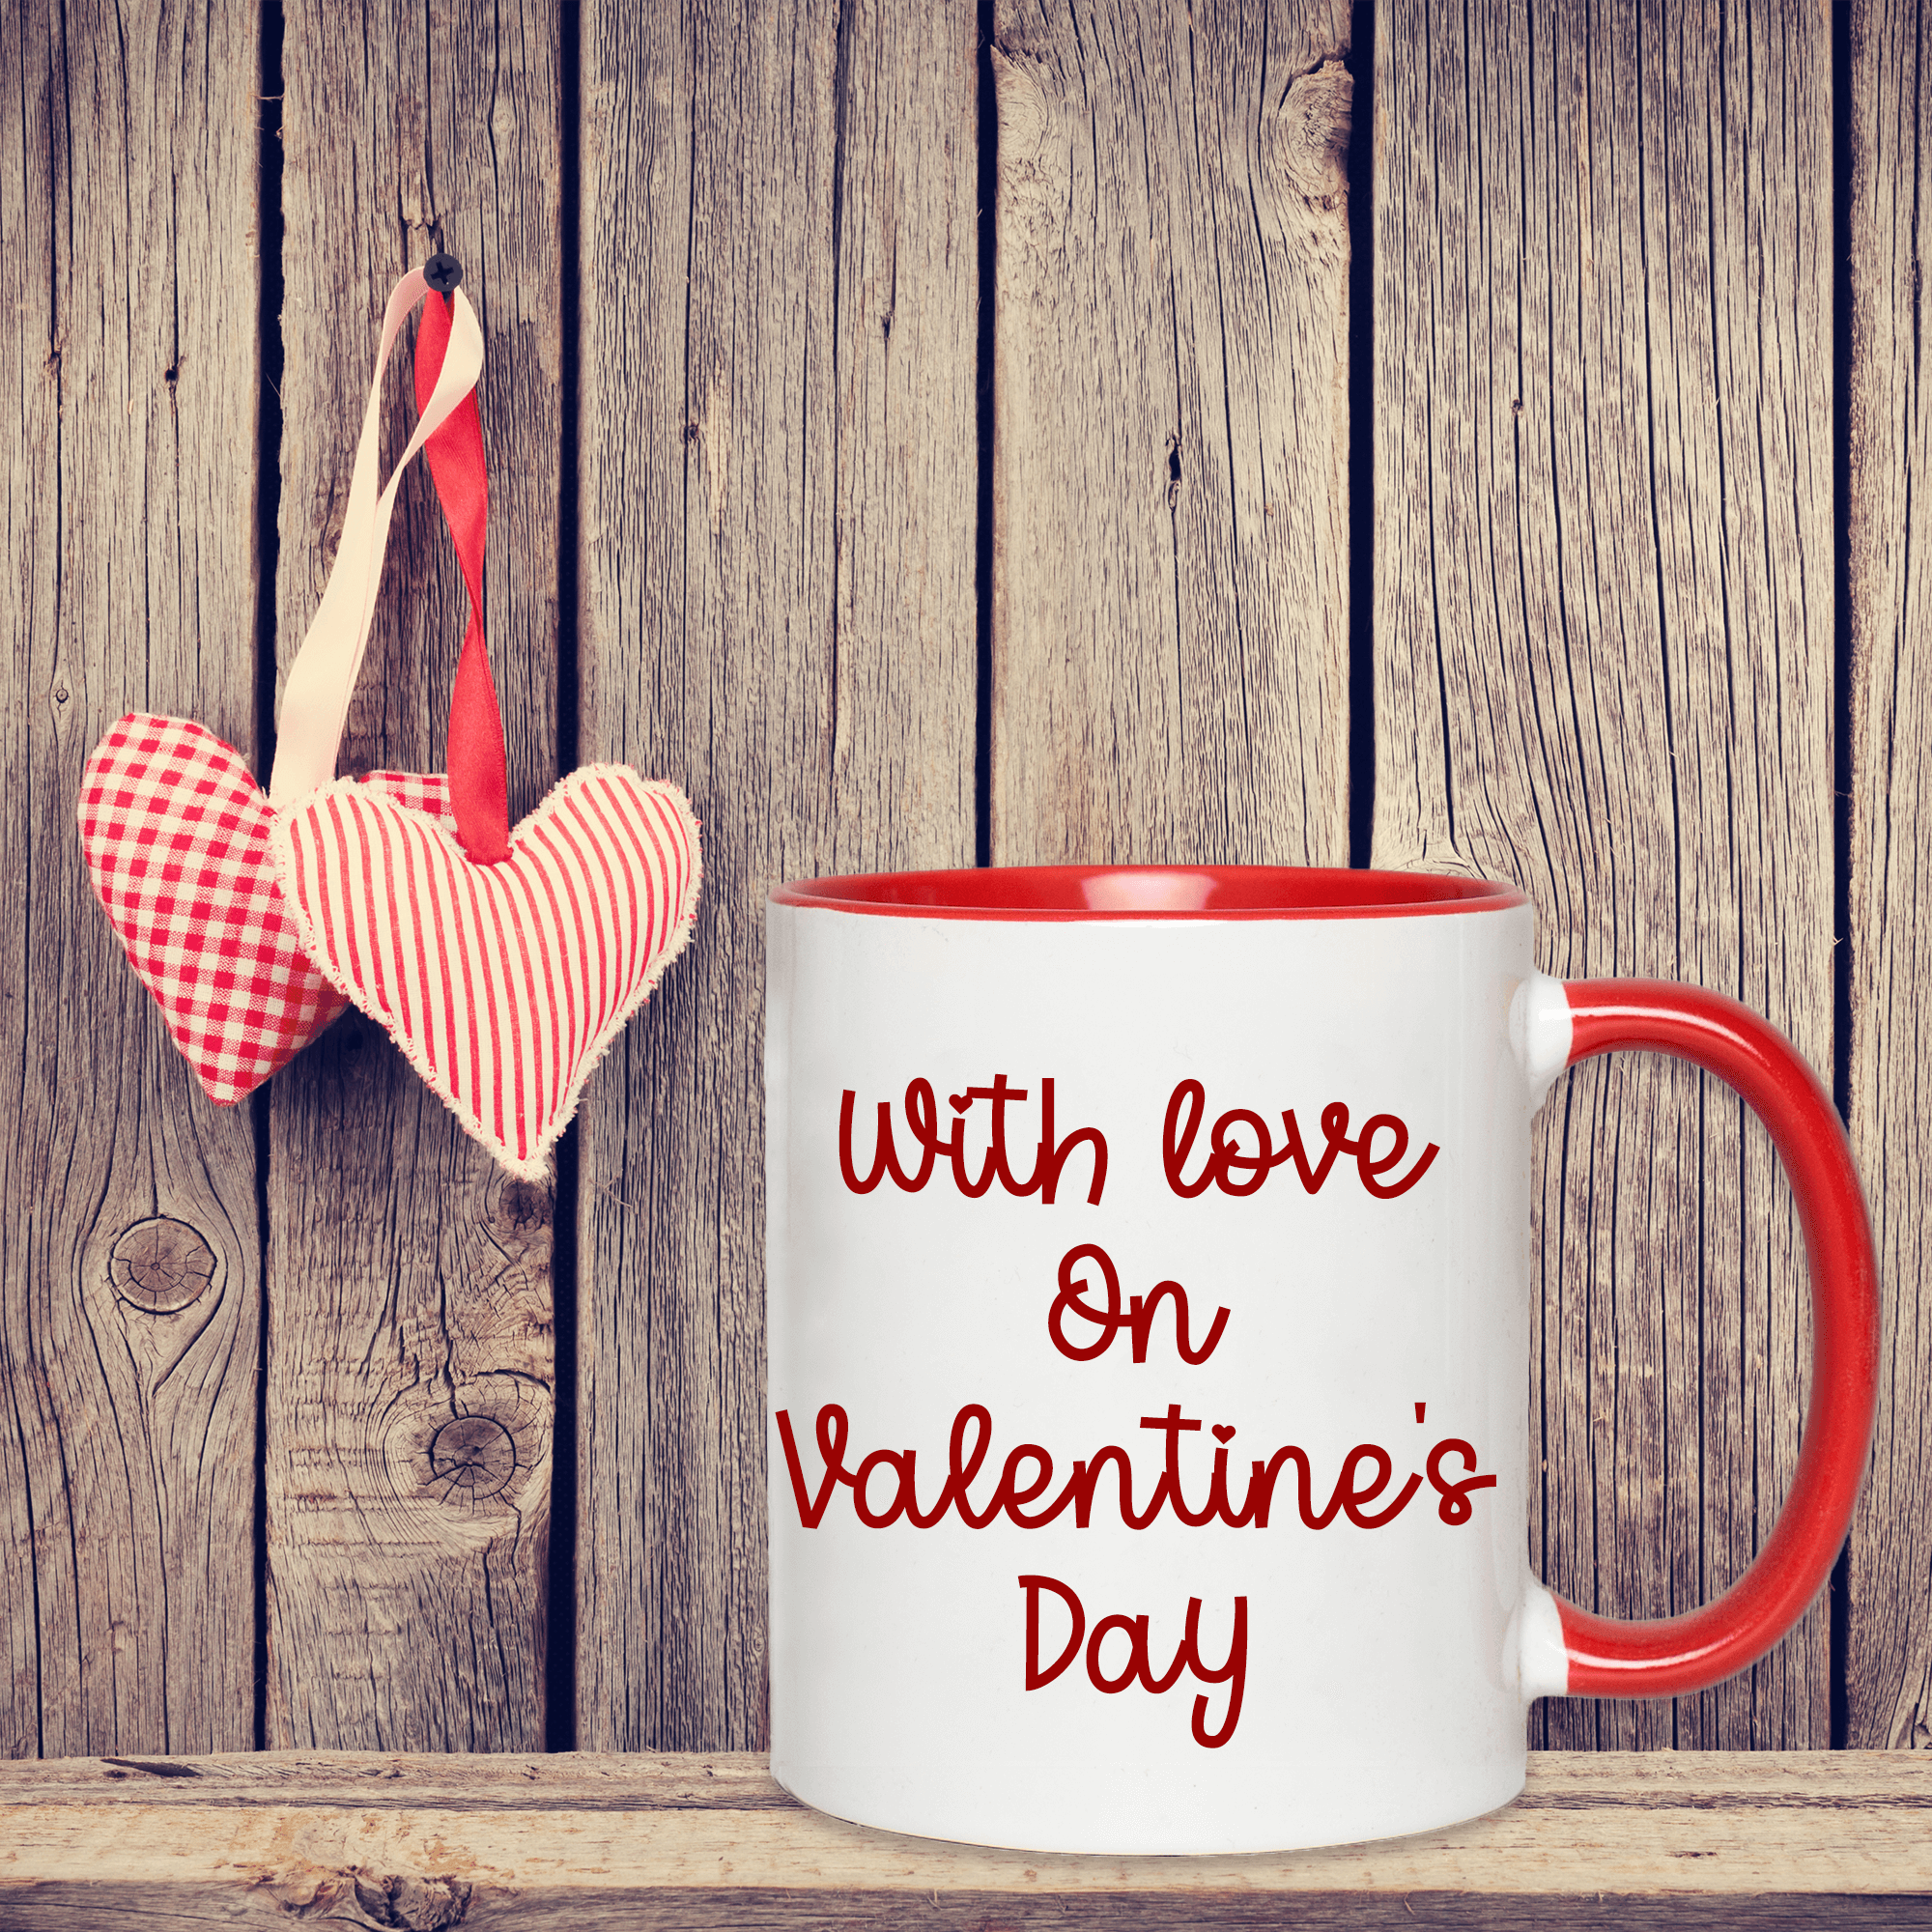 My Significant Otter - Red and White Valentines Day Mug - Made to Order (Last Orders before Valentines Day: 4th February